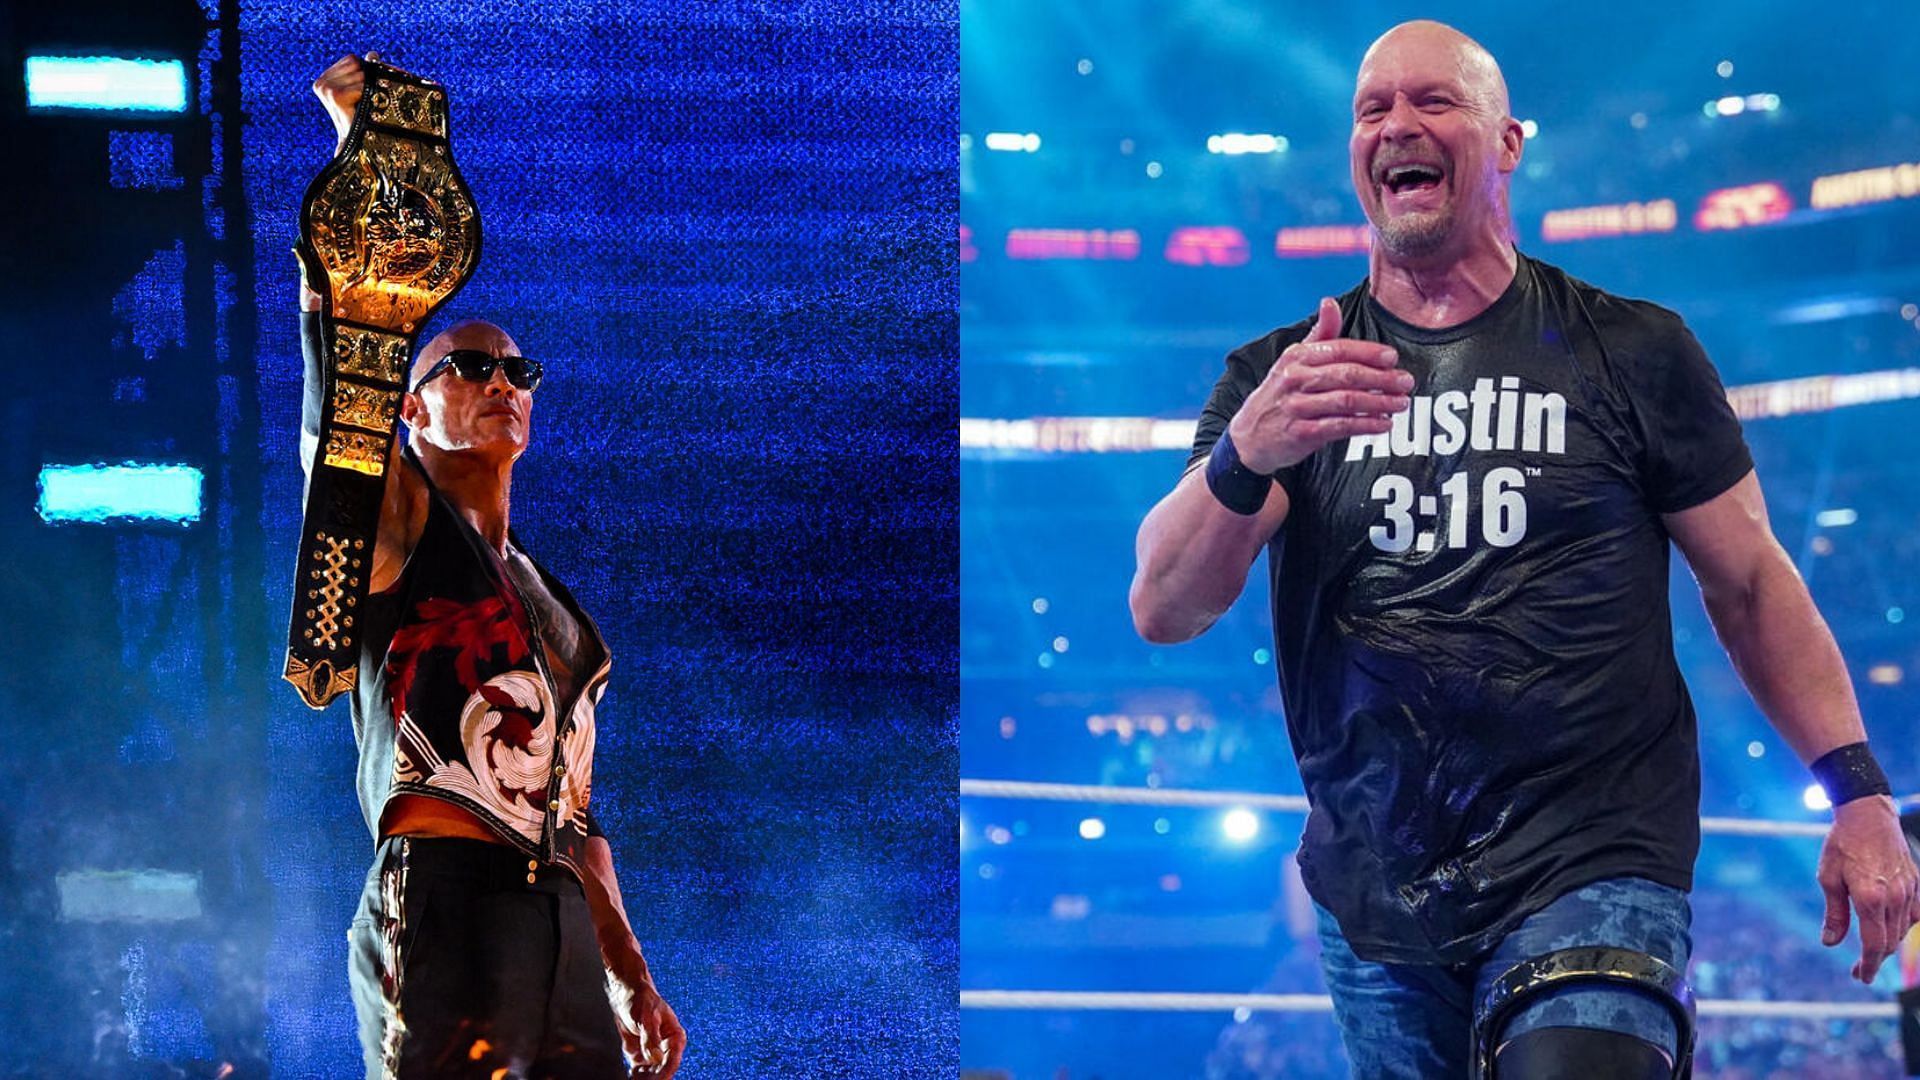 The Rock and Stone Cold Steve Austin are two of the most iconic figures in WWE [Photos courtesy of WWE